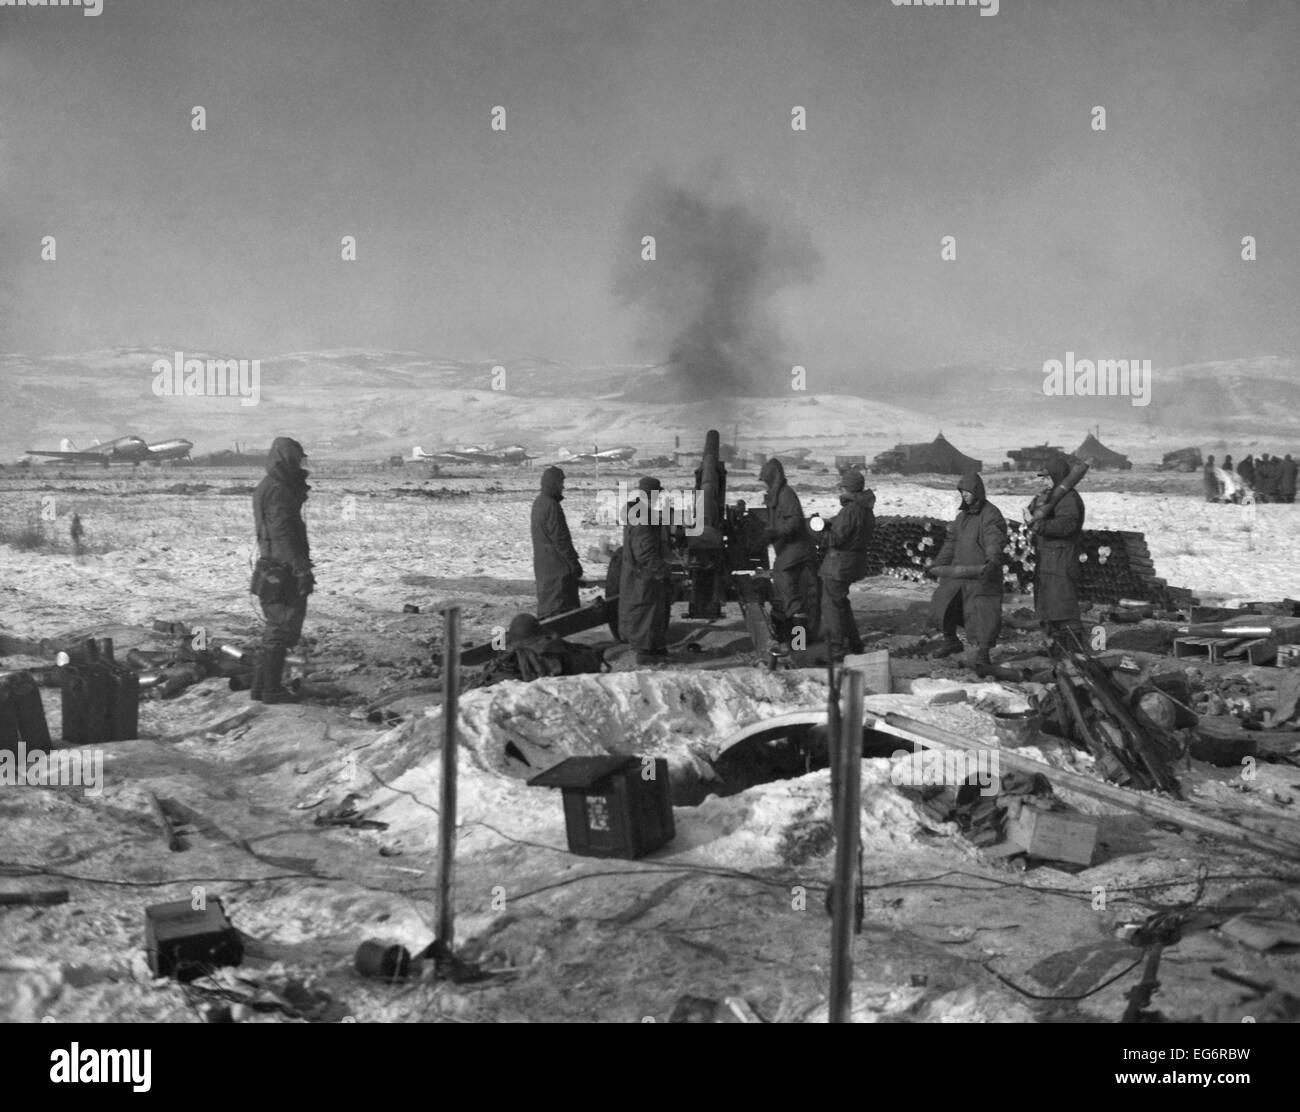 Marine 105mm howitzers defend Hagaru-ri airstrip from Chinese army as planes evacuate wounded. Guns fire right over airfield Stock Photo